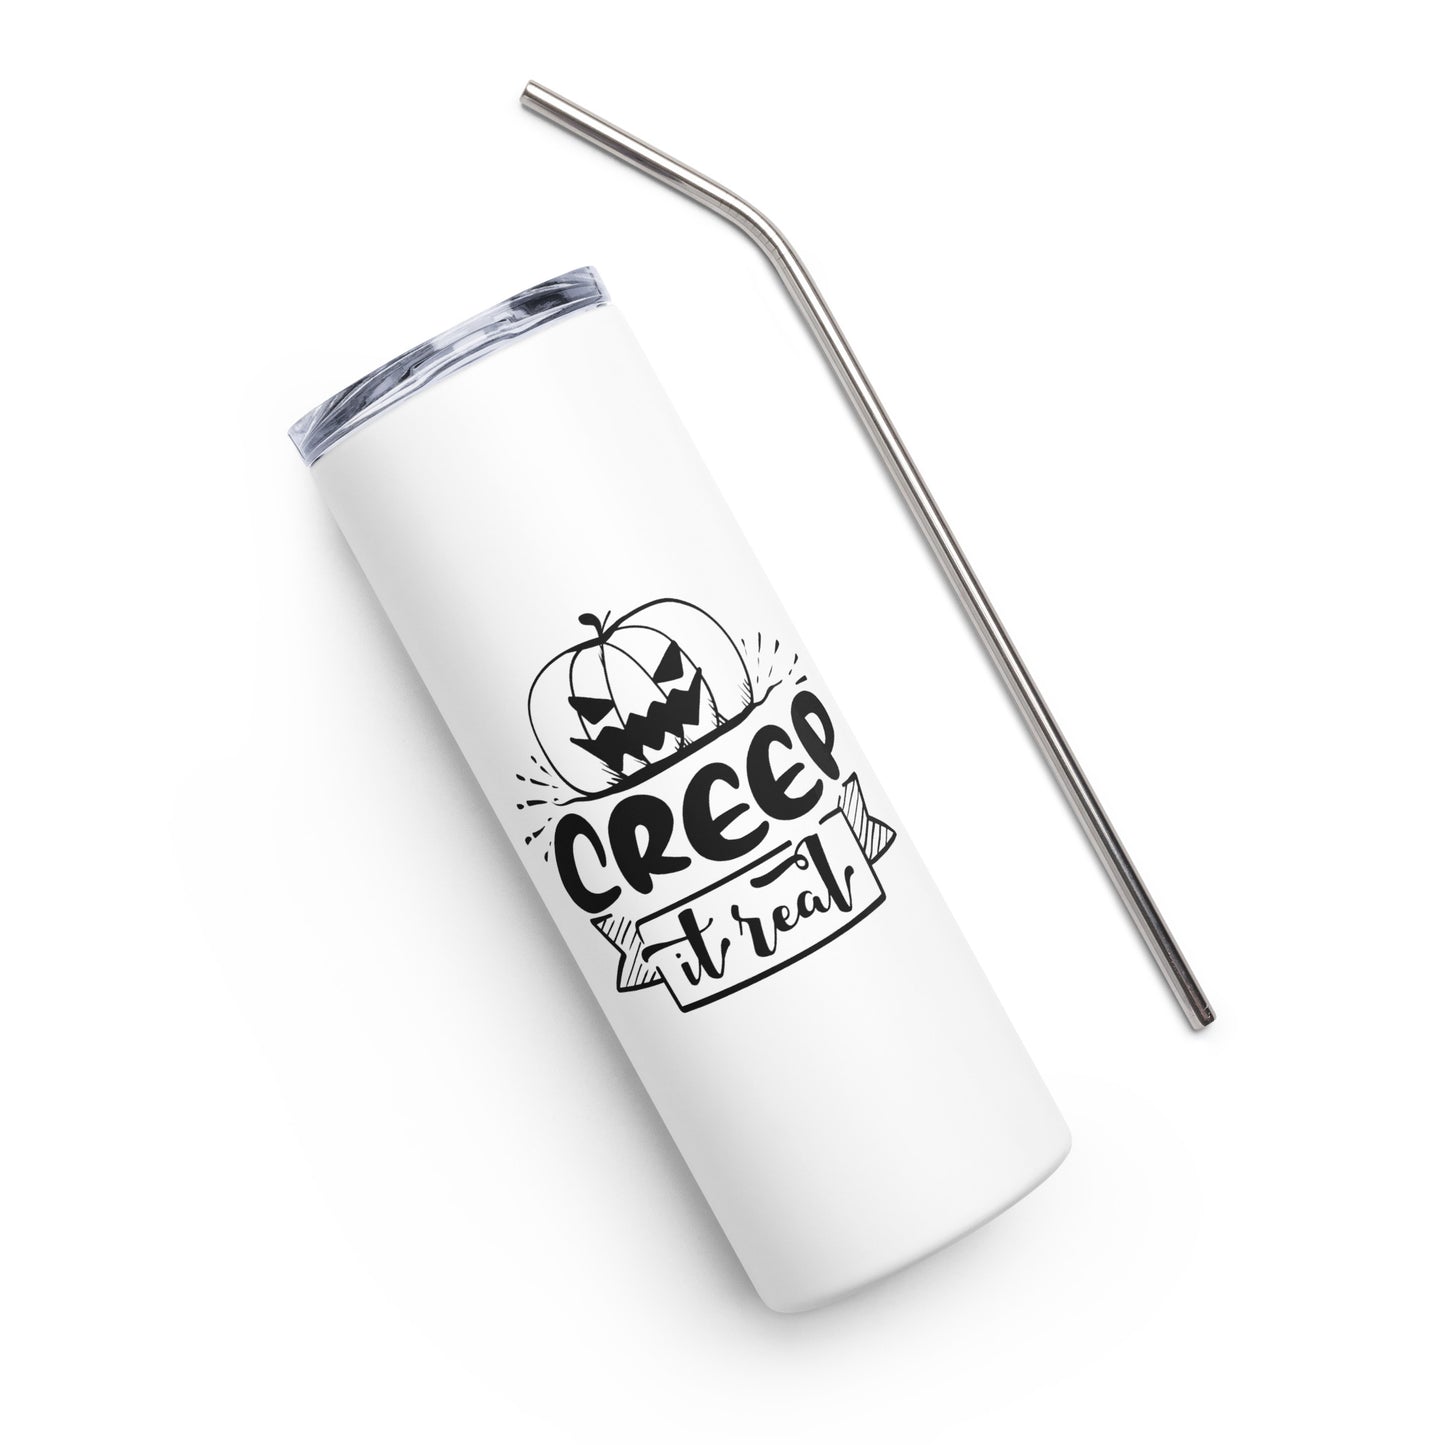 Creep it Real Stainless steel tumbler